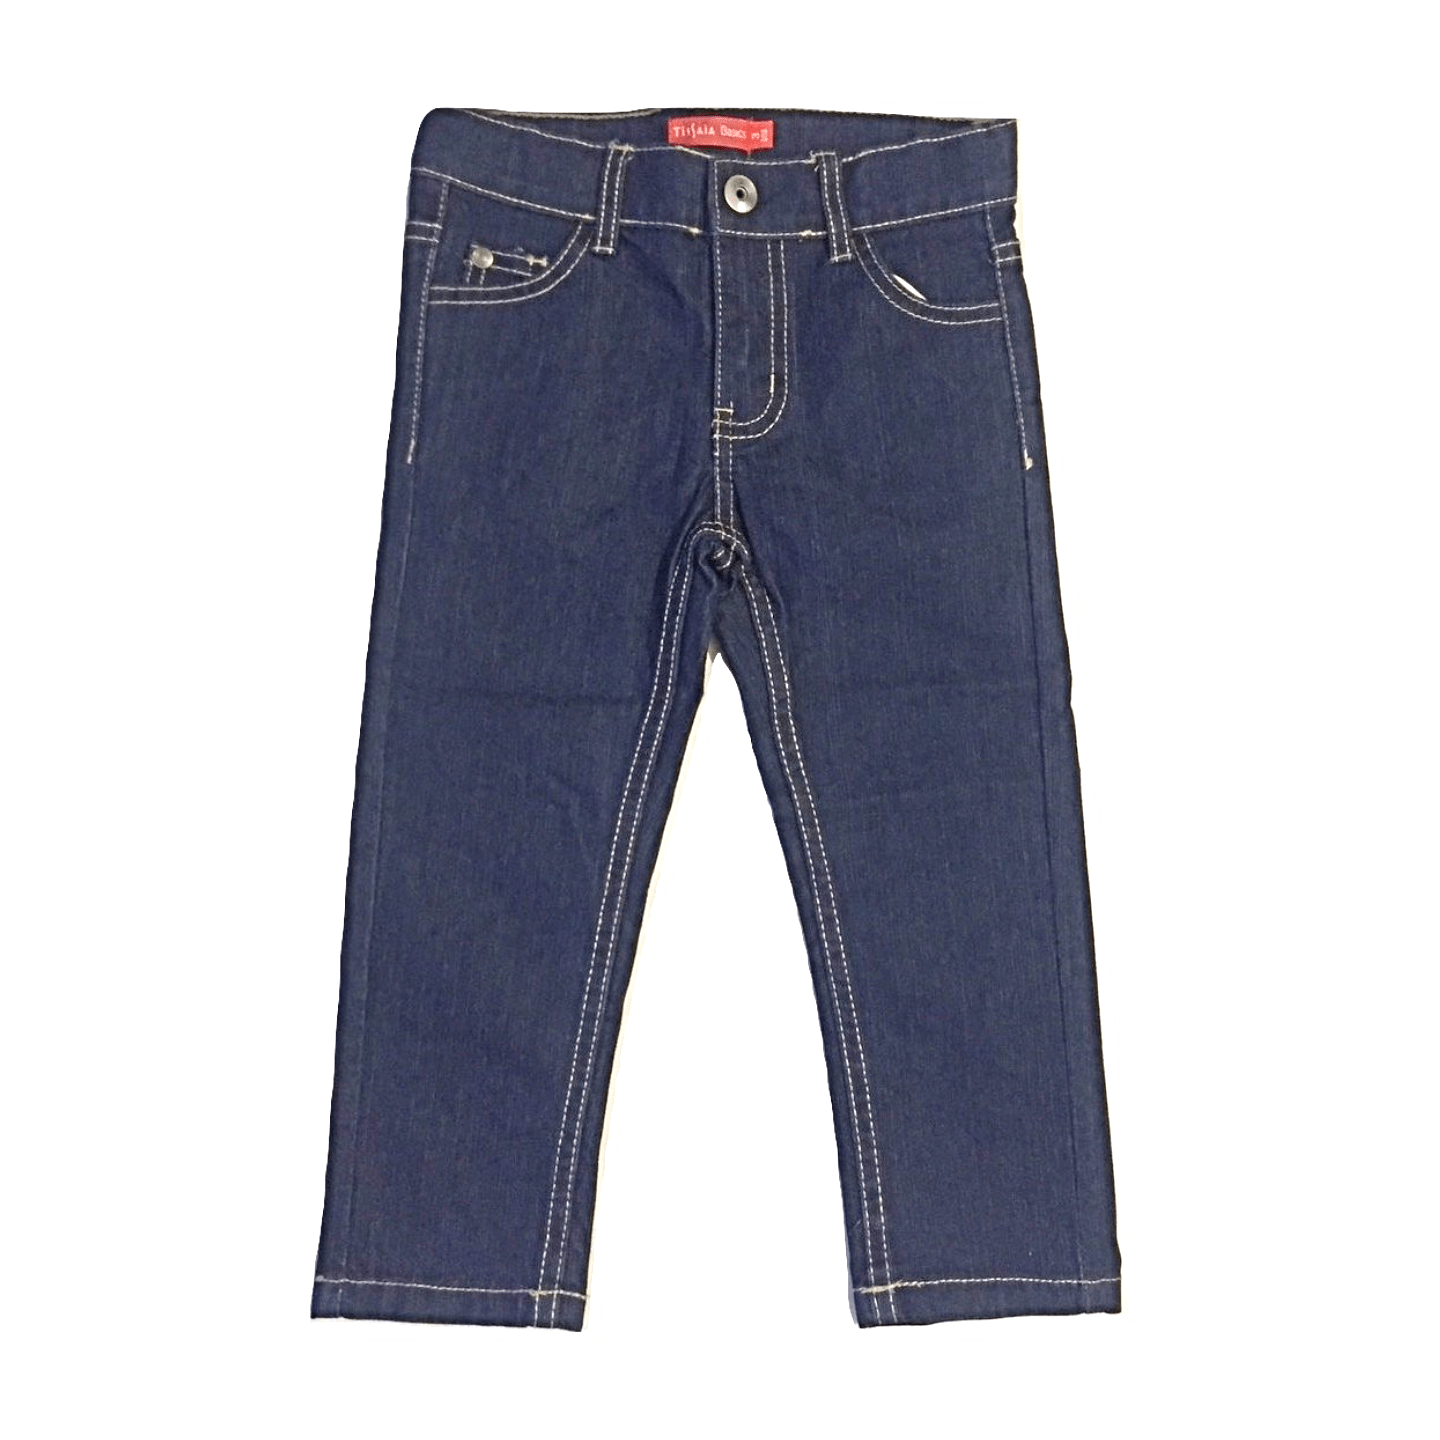 Tissaia Basic Navy Blue Boys Jeans - Stockpoint Apparel Outlet